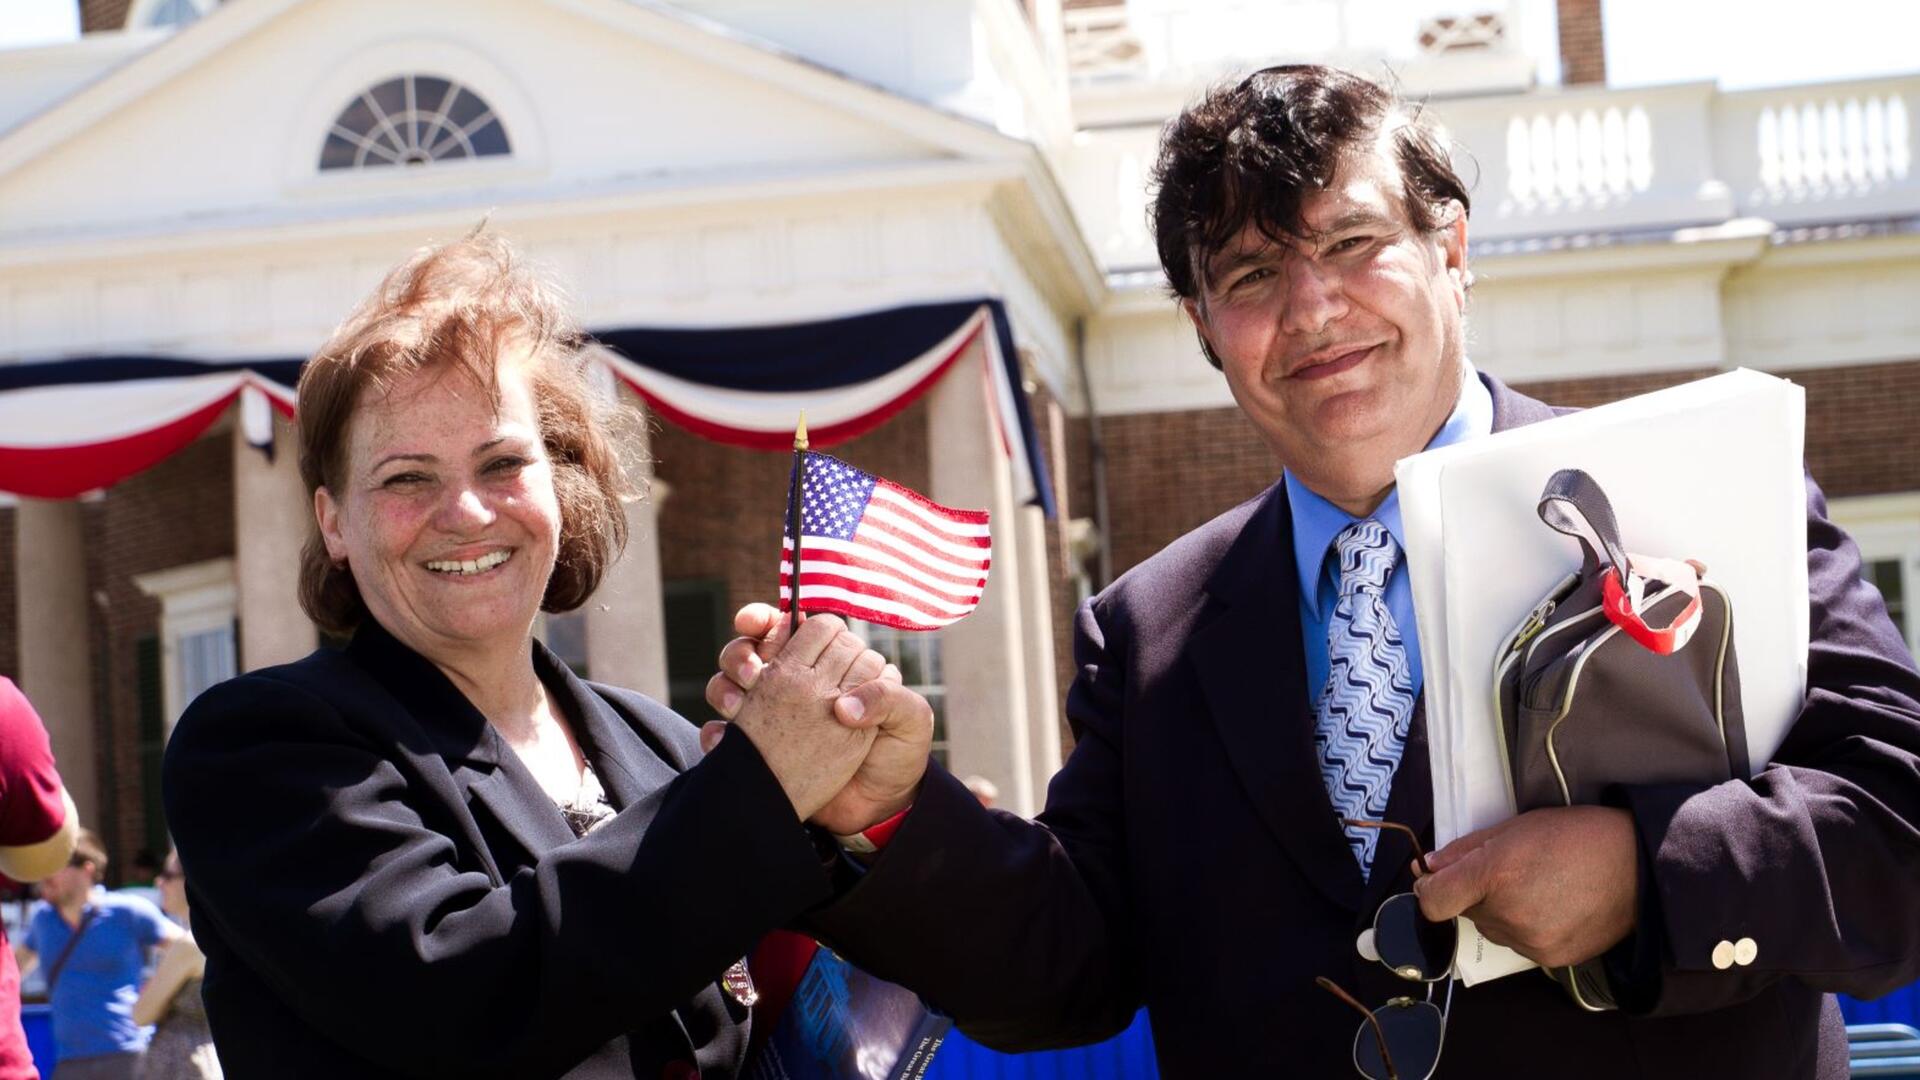 A refugee couple hold a U.S. flag at their naturalization ceremony in Charlottesville, VA